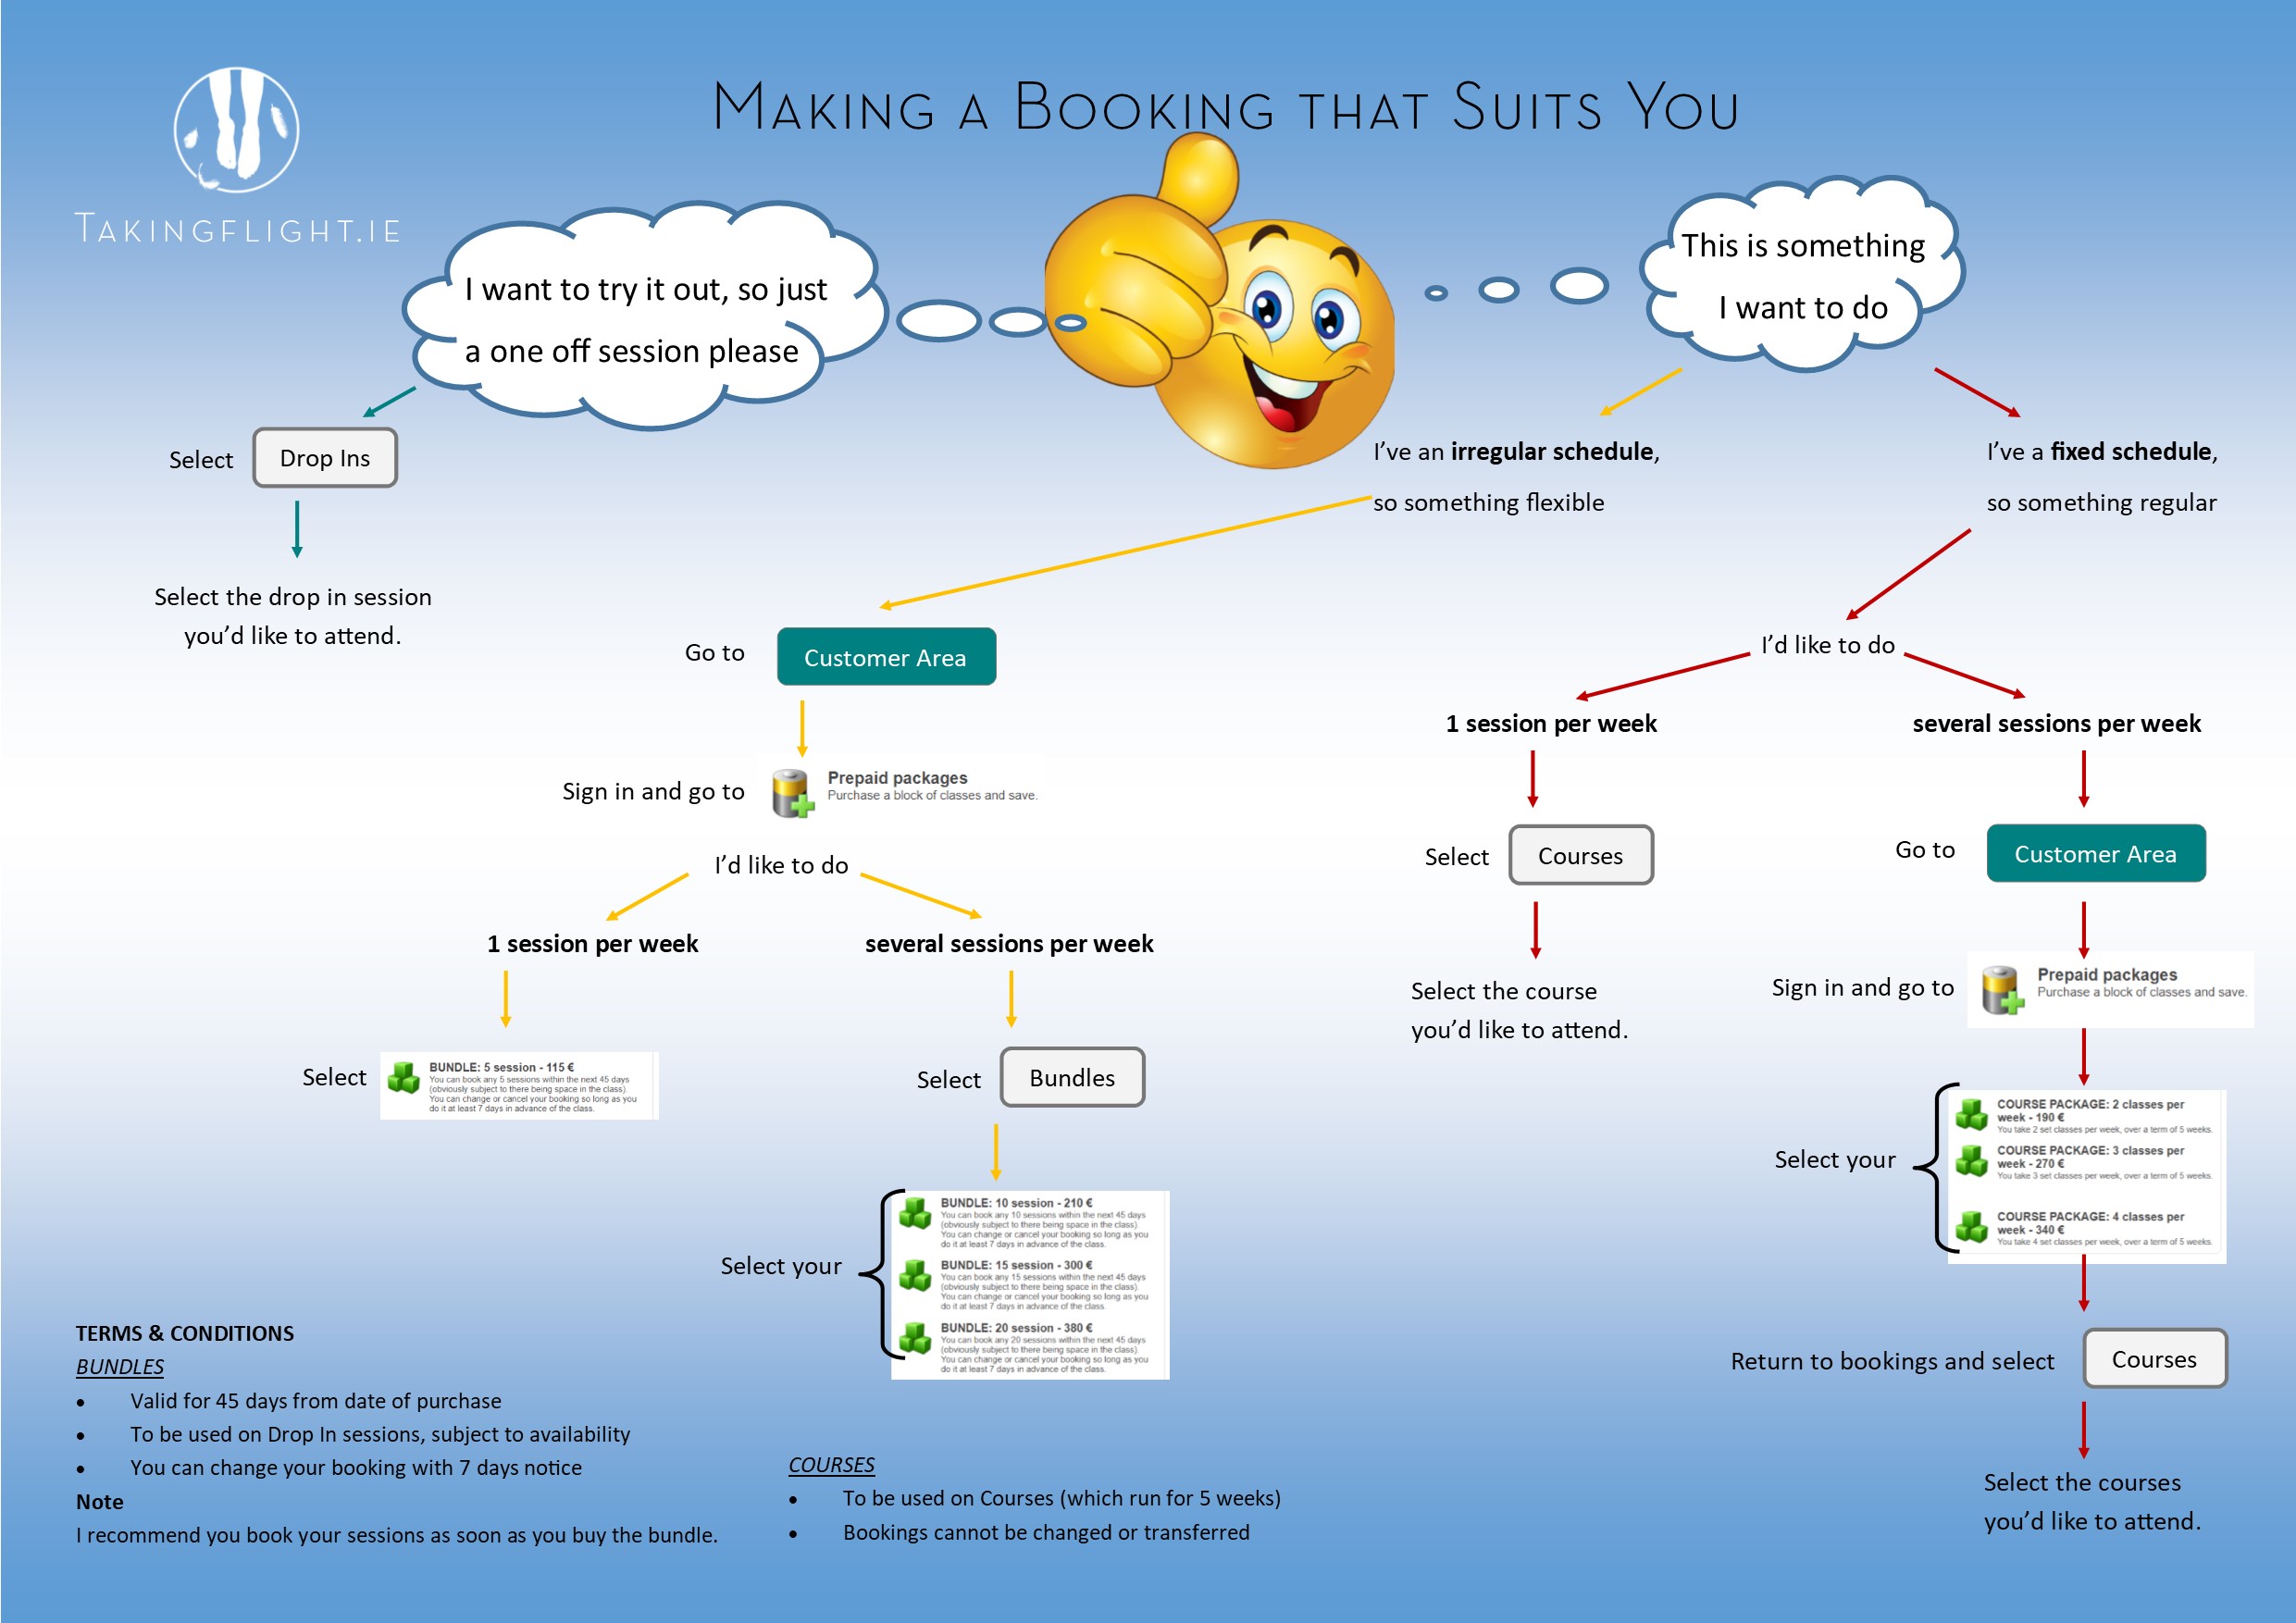 A flow chart of how to book at Taking Flight